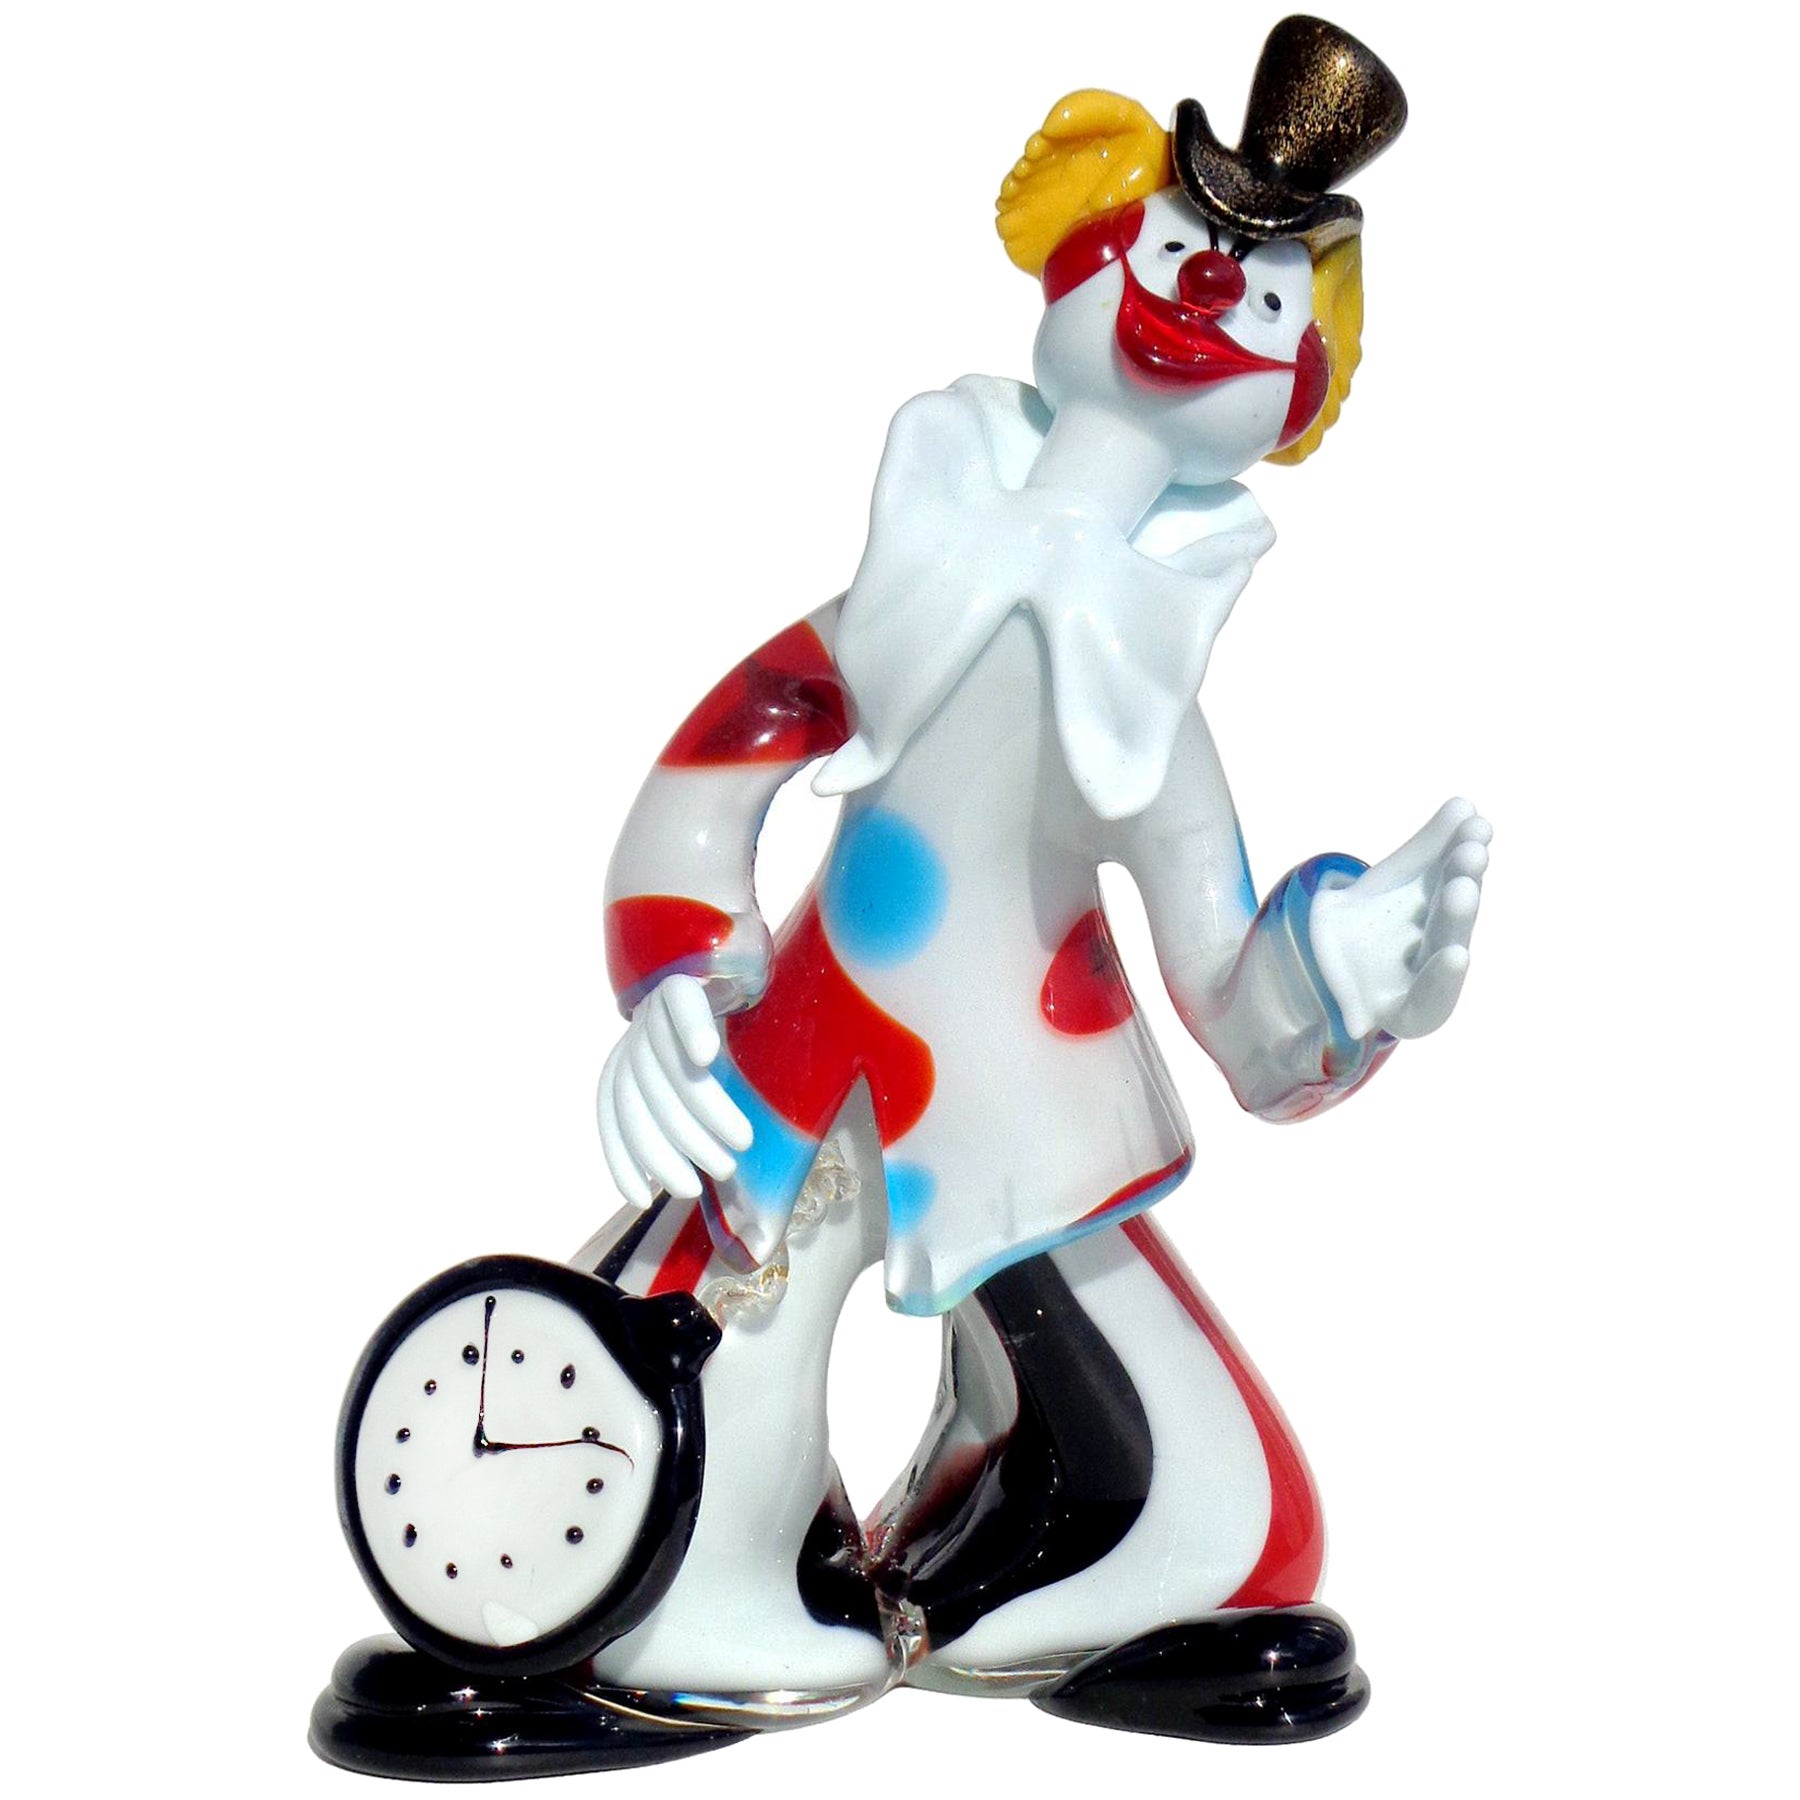 Murano Dandy Clown with Pocket Watch Top Hat Italian Art Glass Vintage Sculpture For Sale